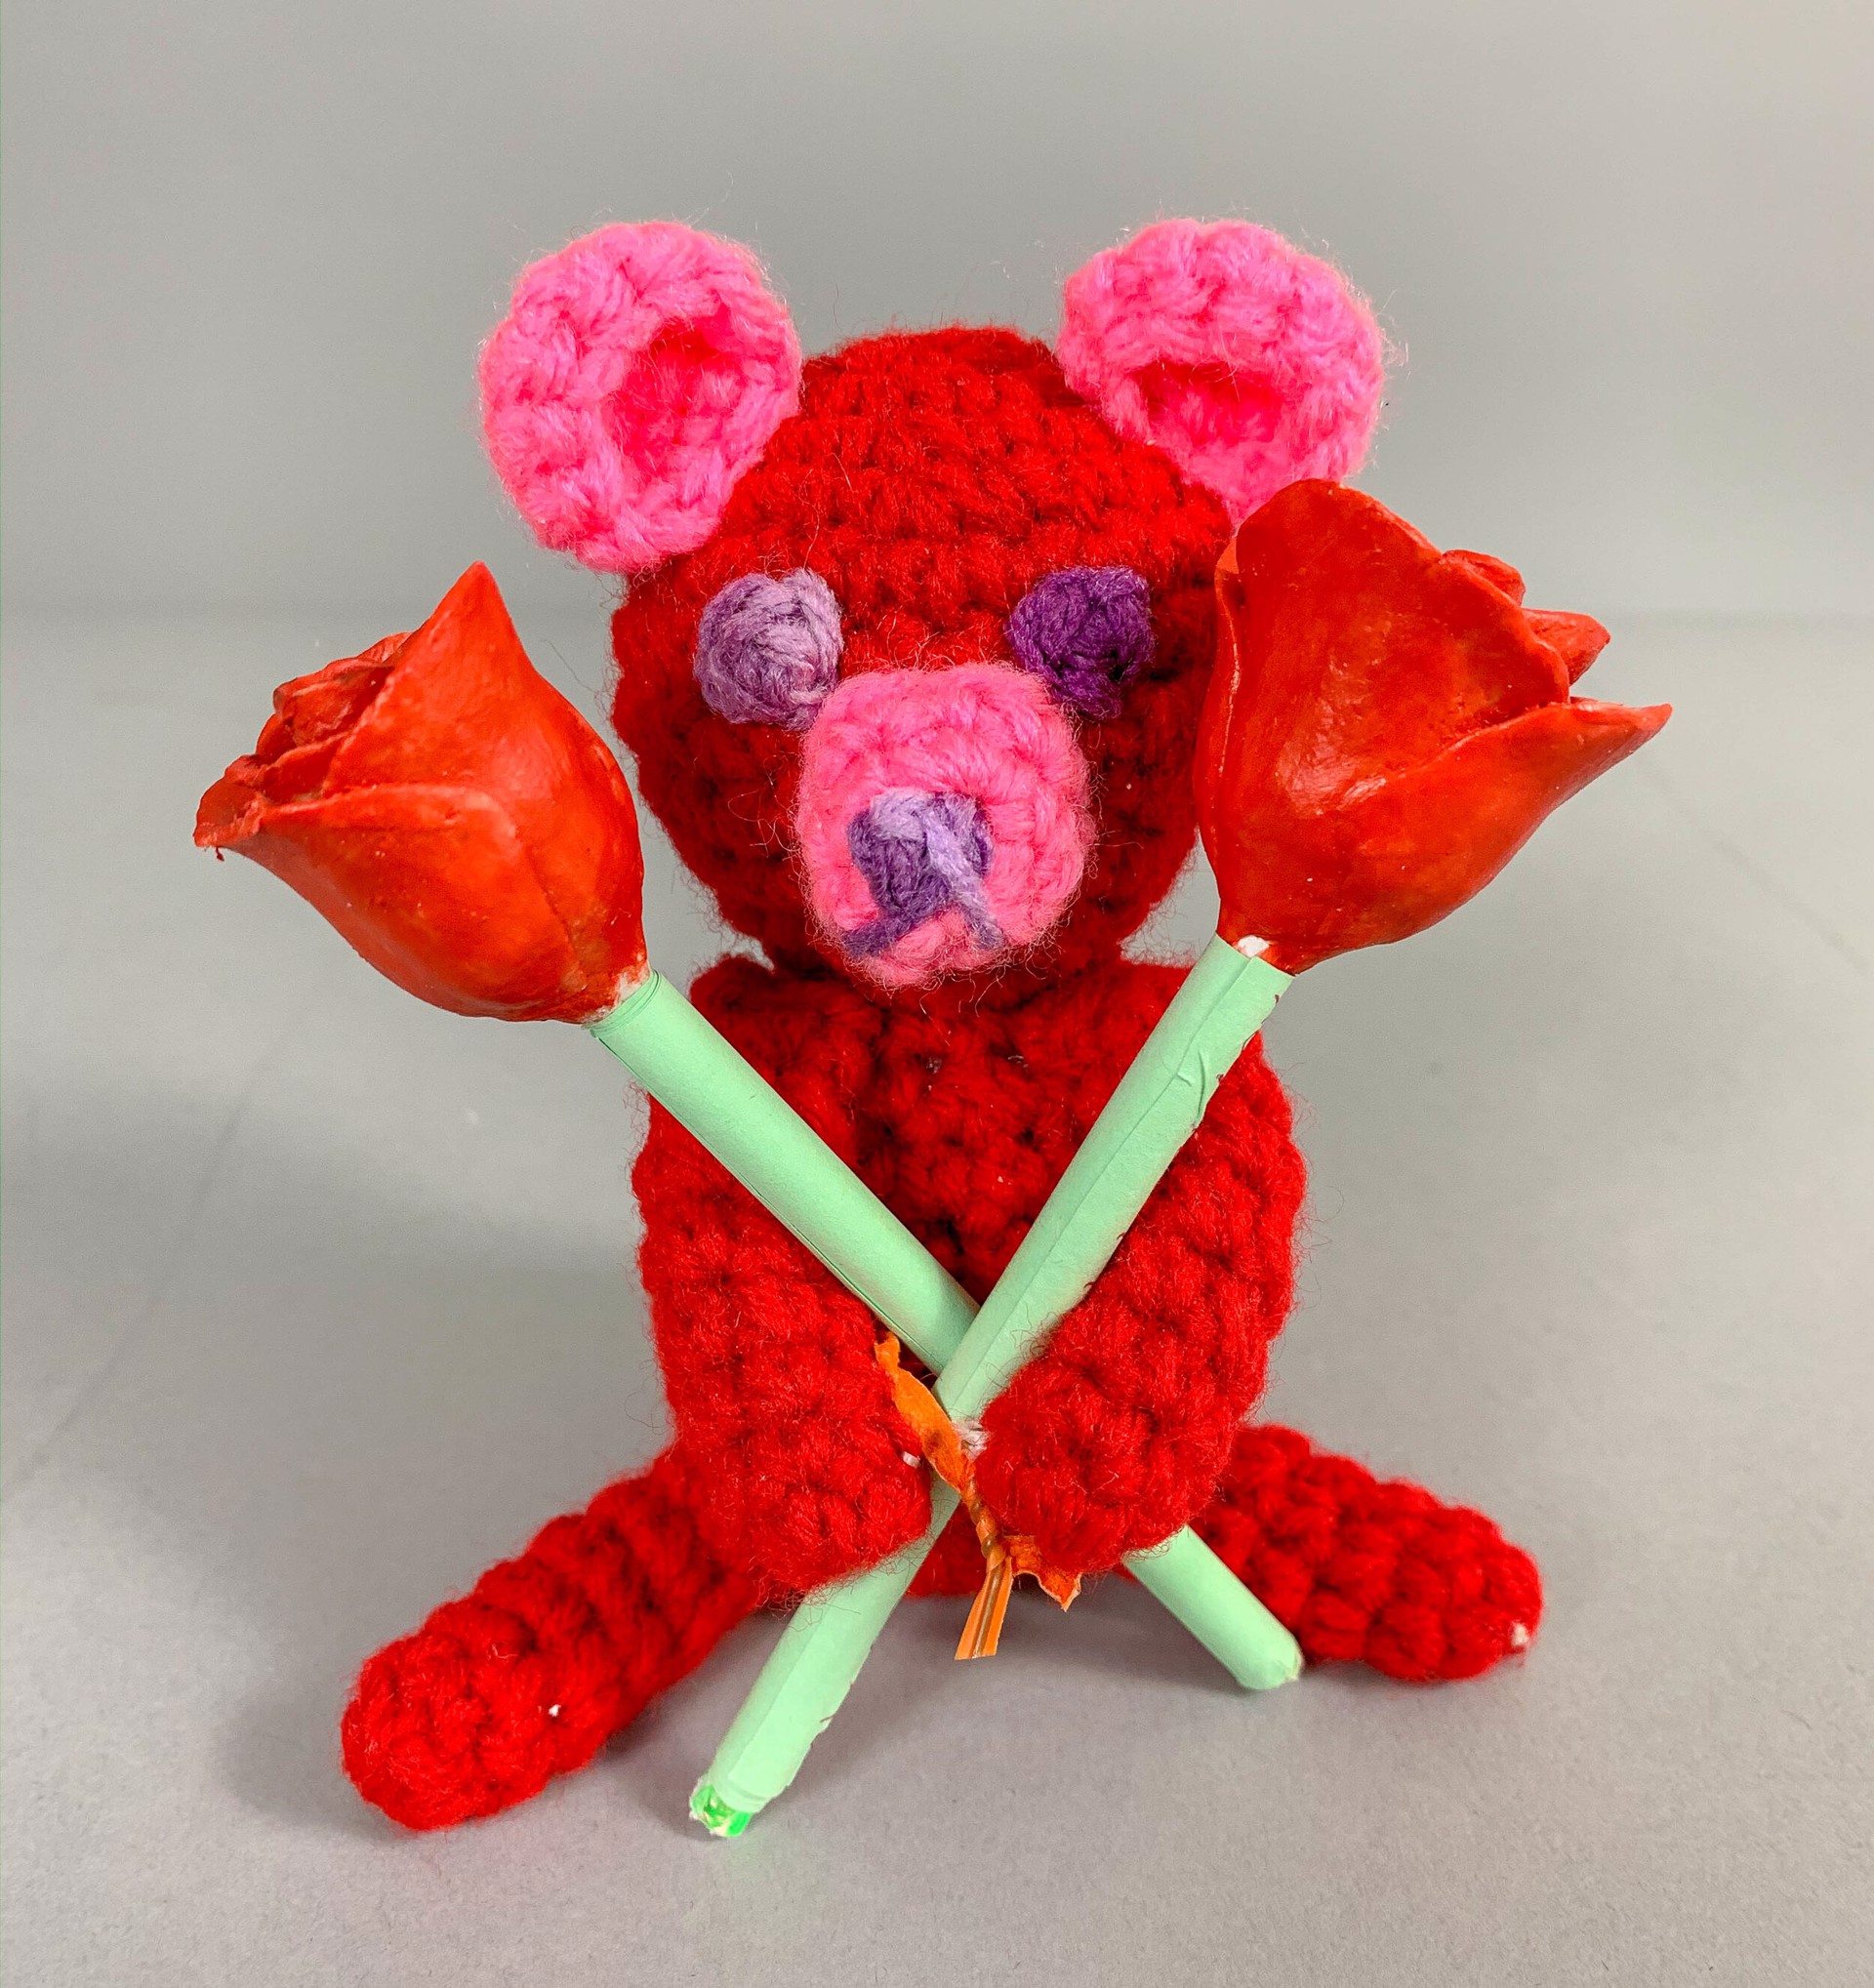 Bear Holiday, 2 Roses by Jerry T. Lopez